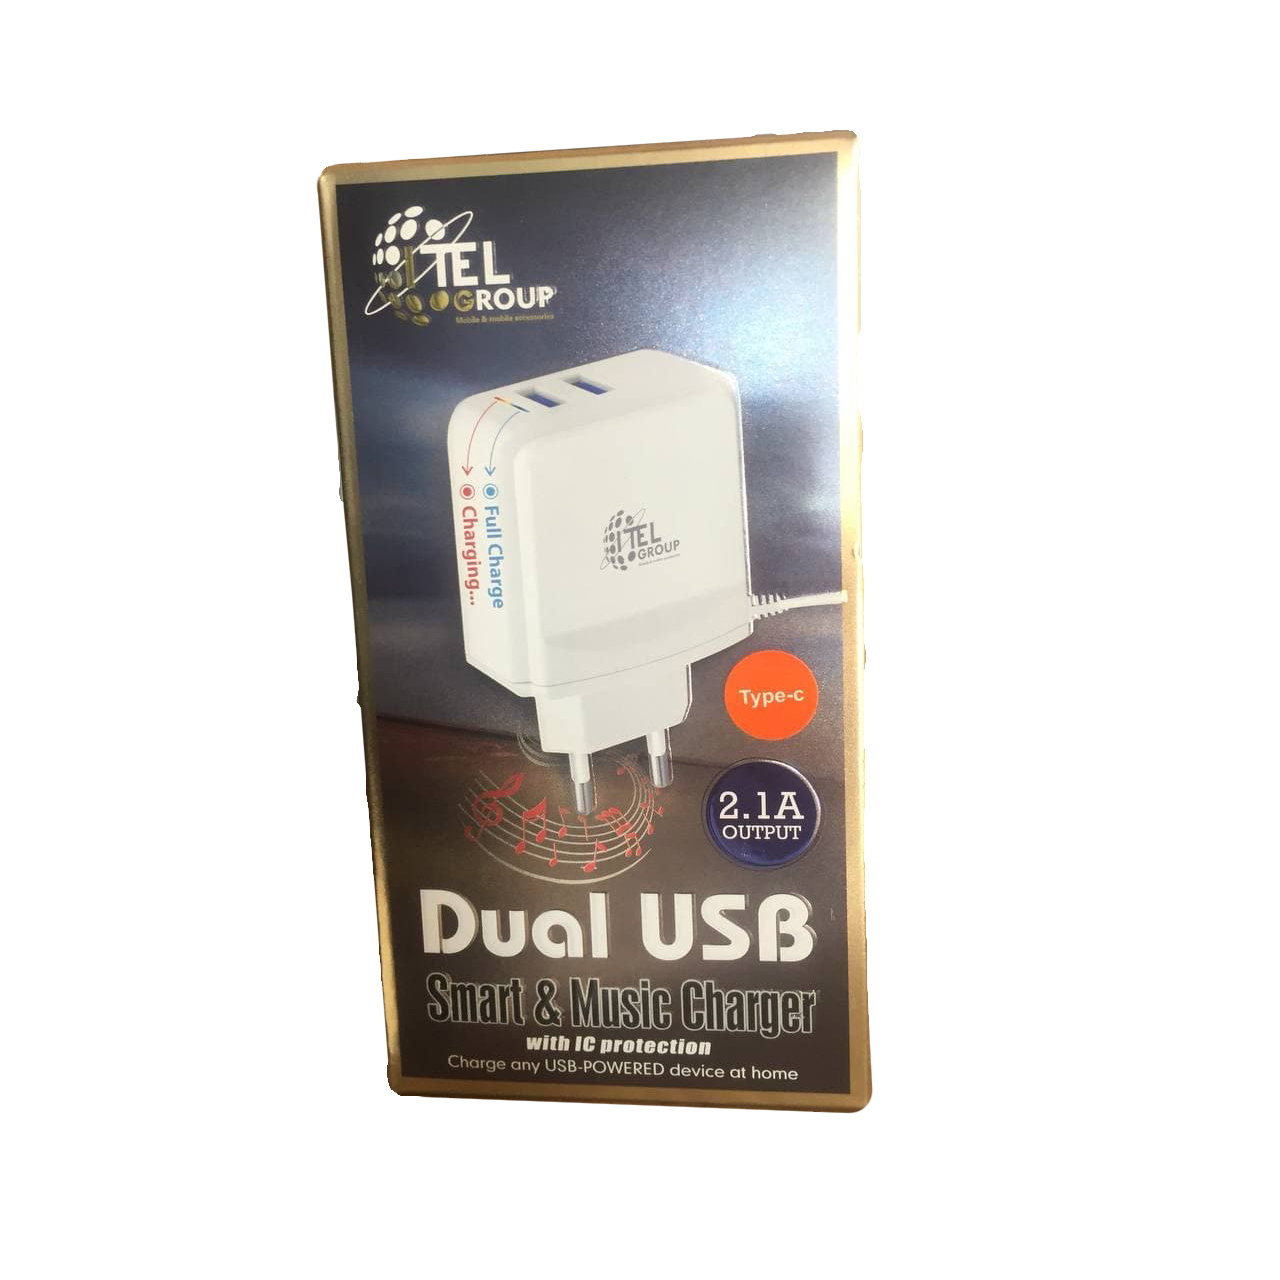 CHARGER USB TYPE-C FOR MOBILE&TAB ANDROID I TEL BOUTPUT 2.1A IT-22 شاحن موسيقي مخرجين مع كبل مدمج تايب سي ,Smartphones & Tab Chargers